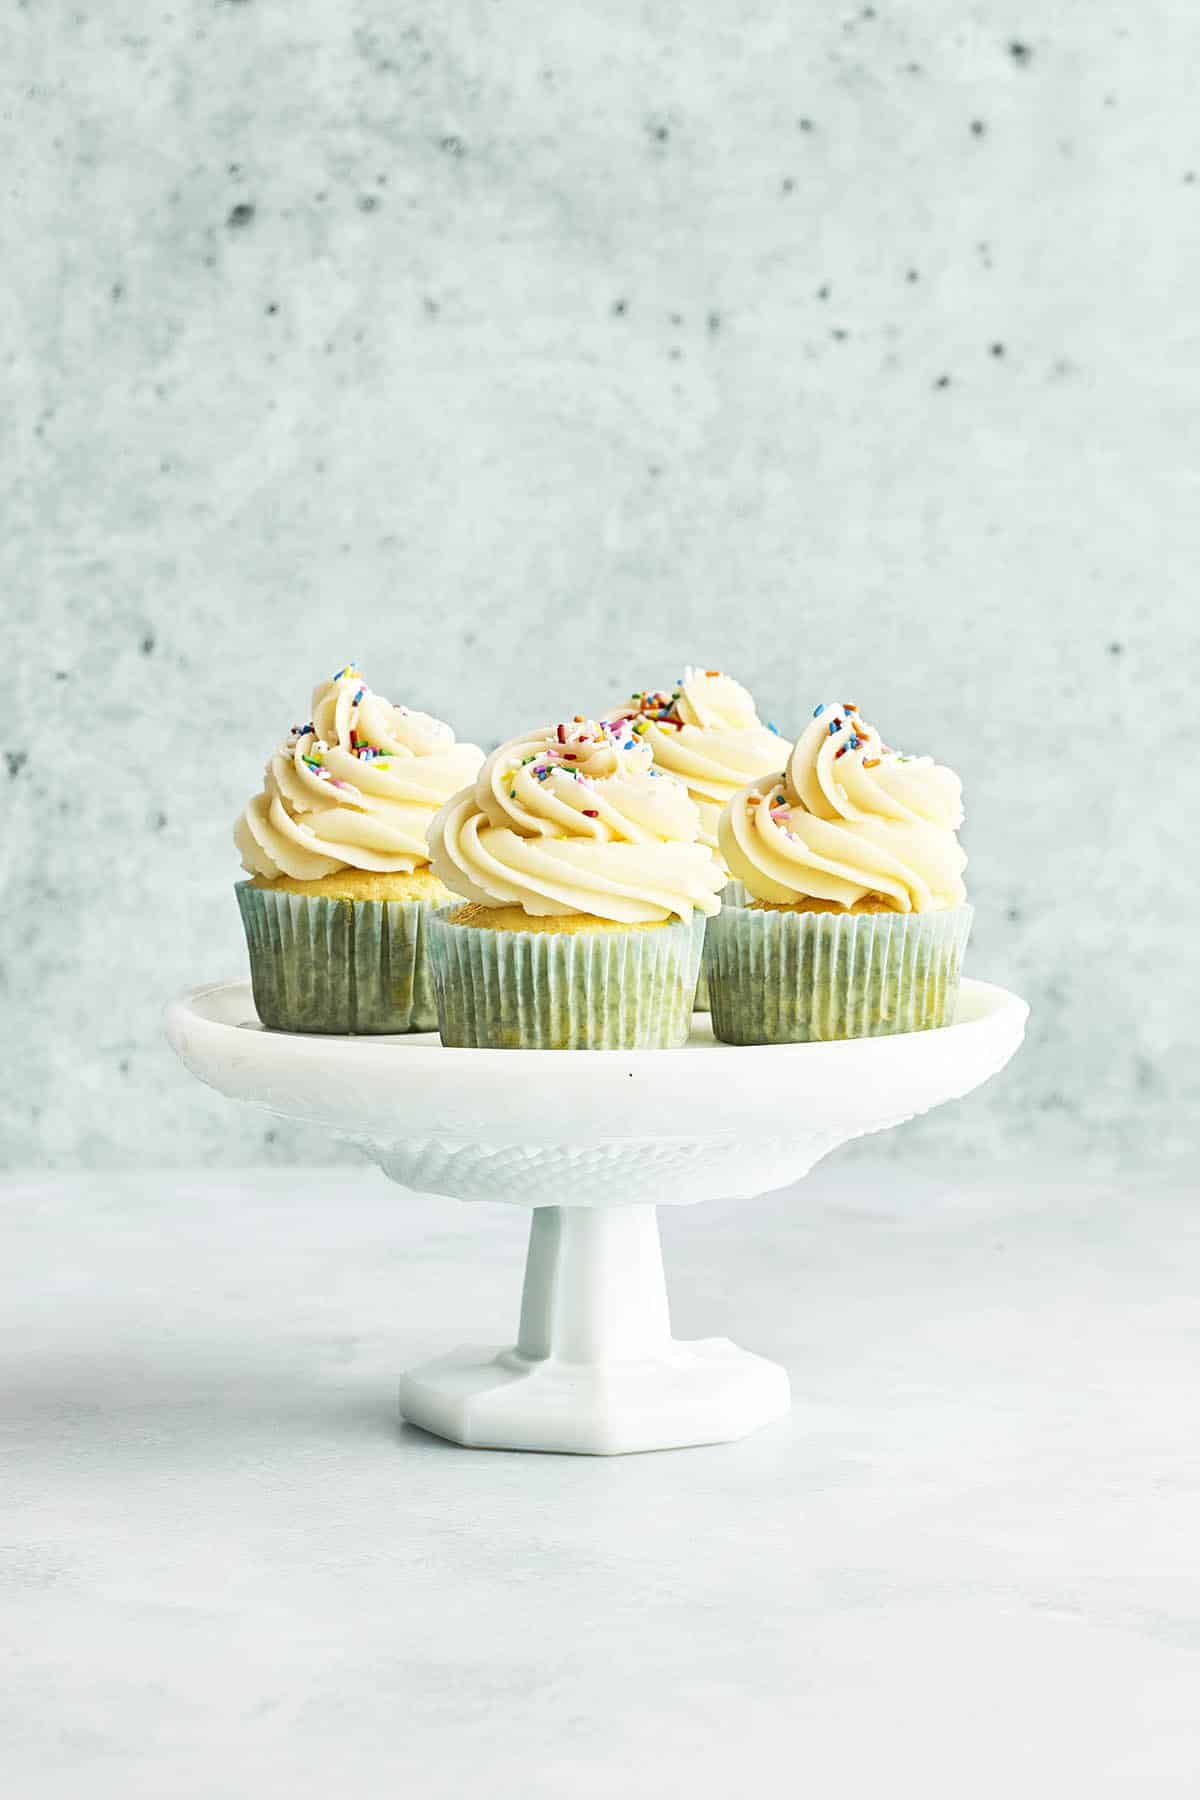 A cake stand with four cupcakes topped with American buttercream resting on top.